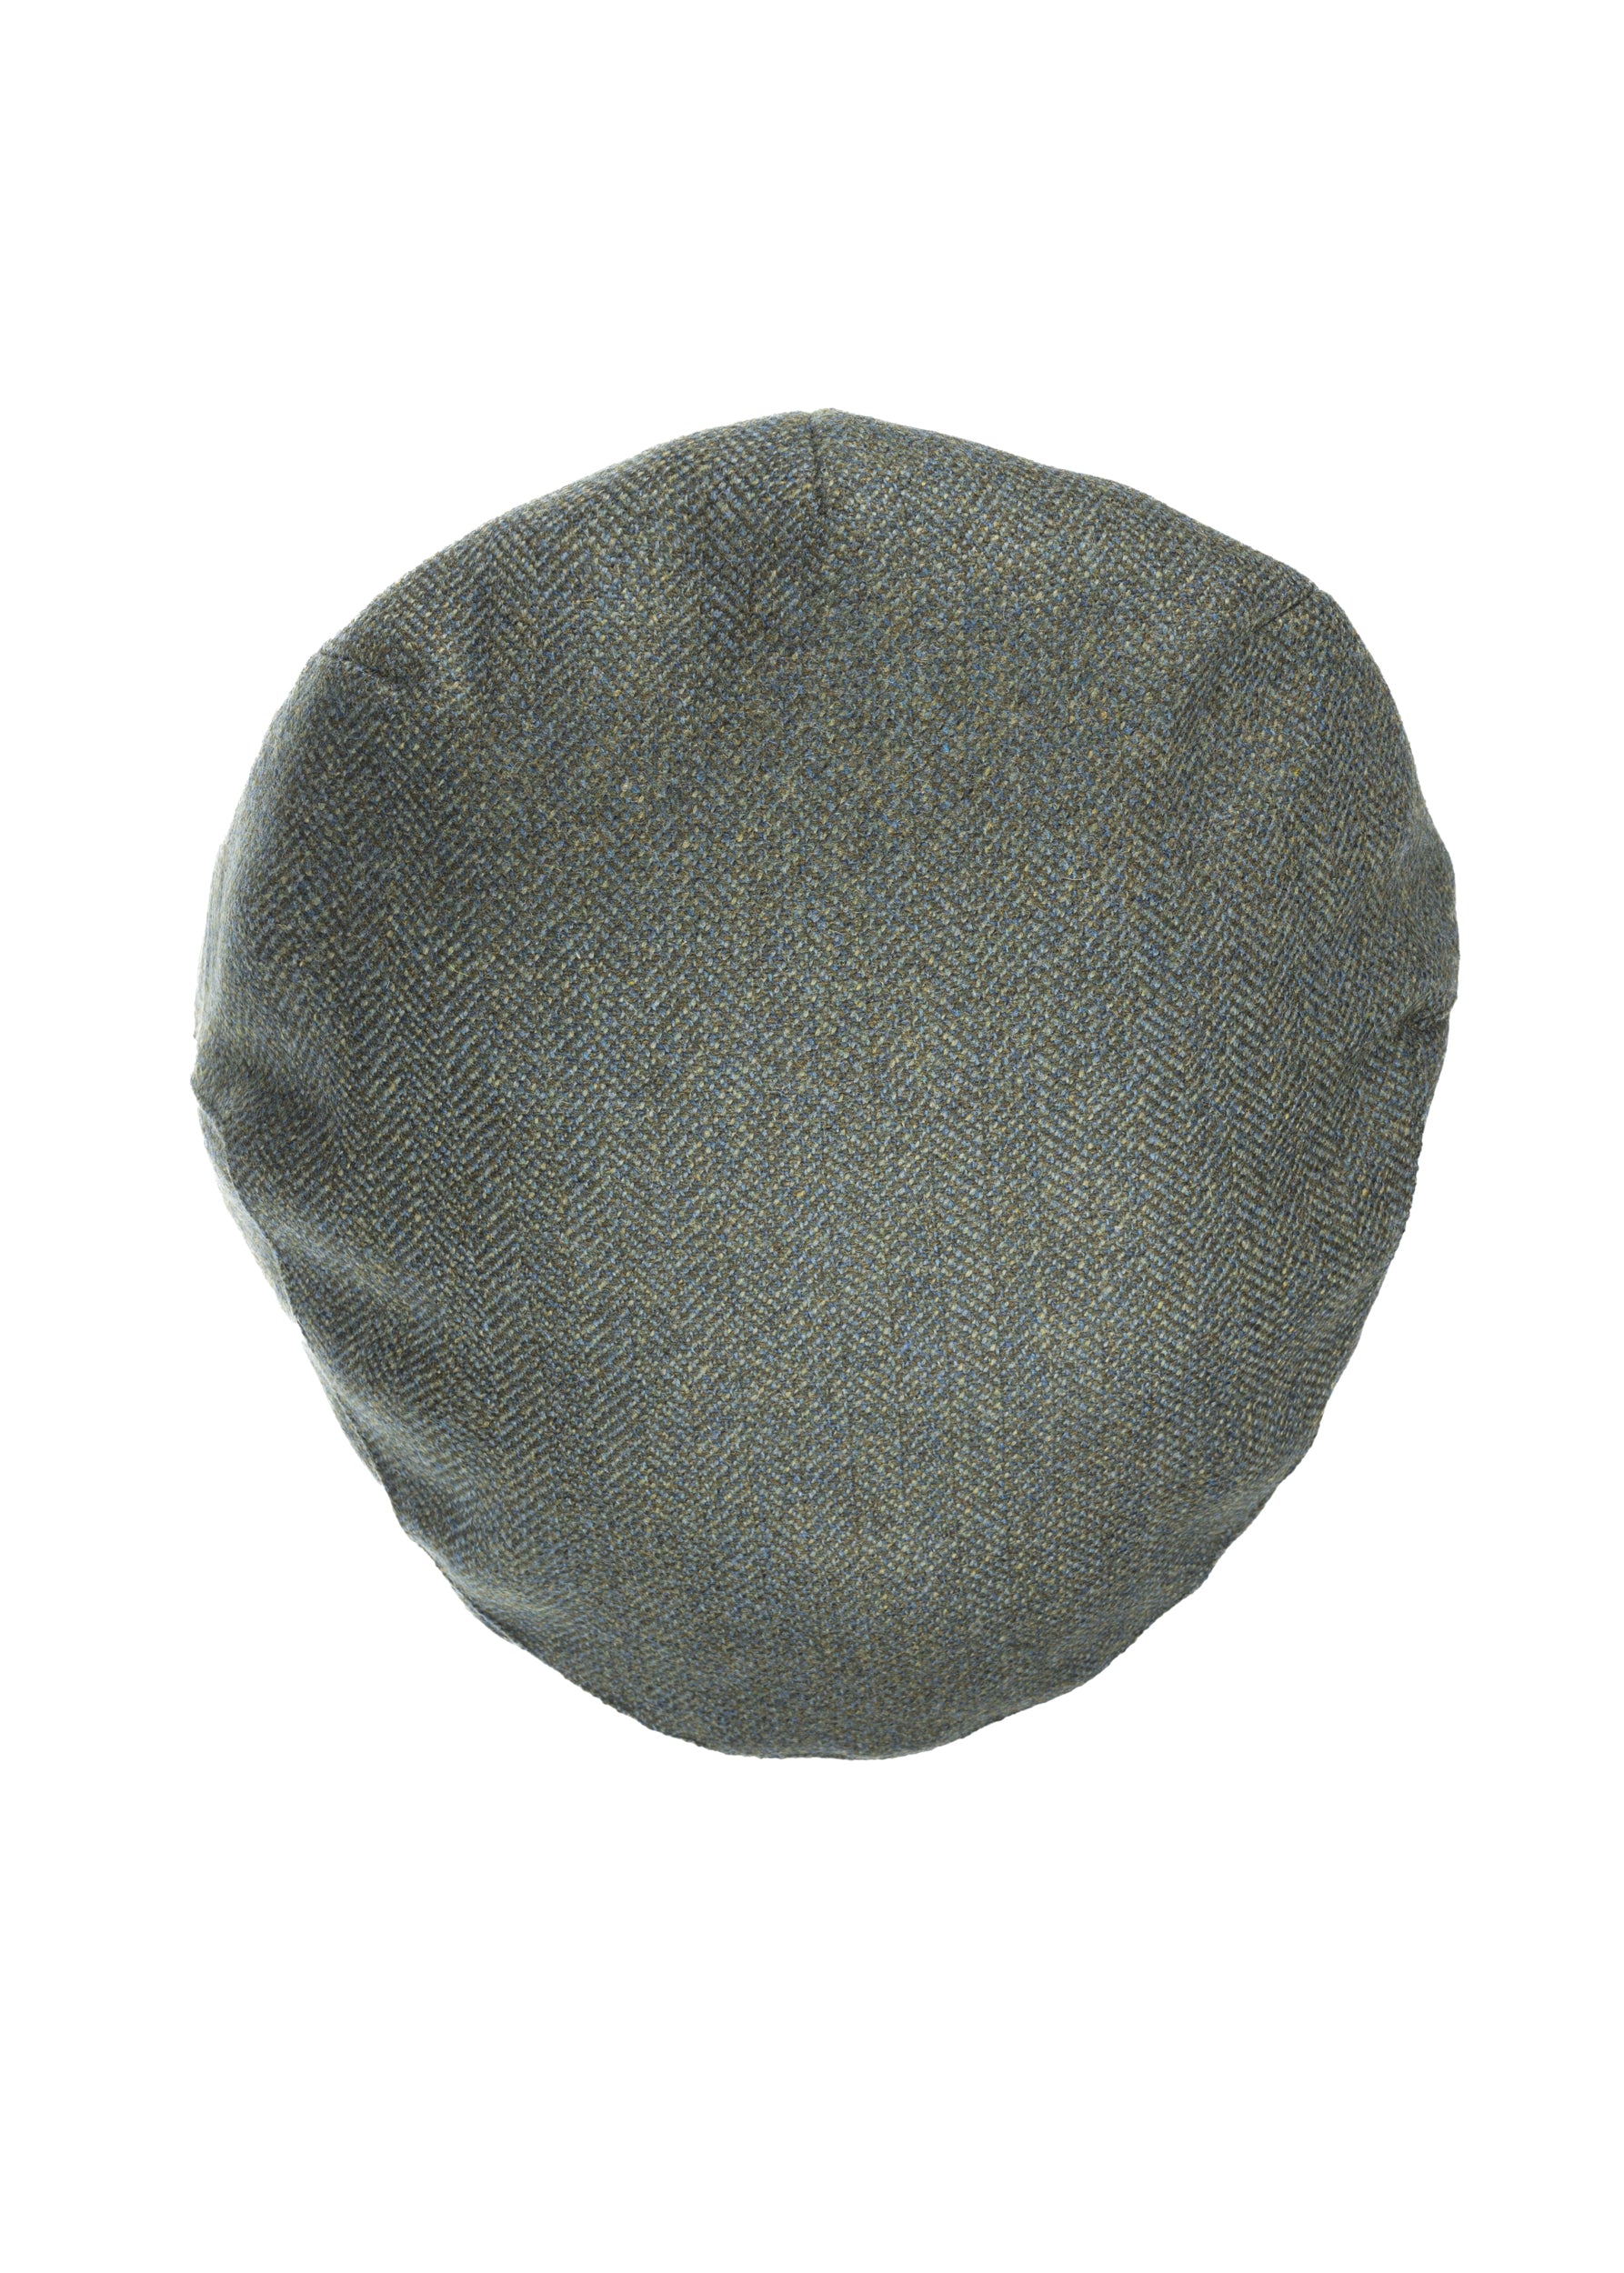 Lovat Mill Teviot Tweed Made in England Balmoral Cap in Thistle